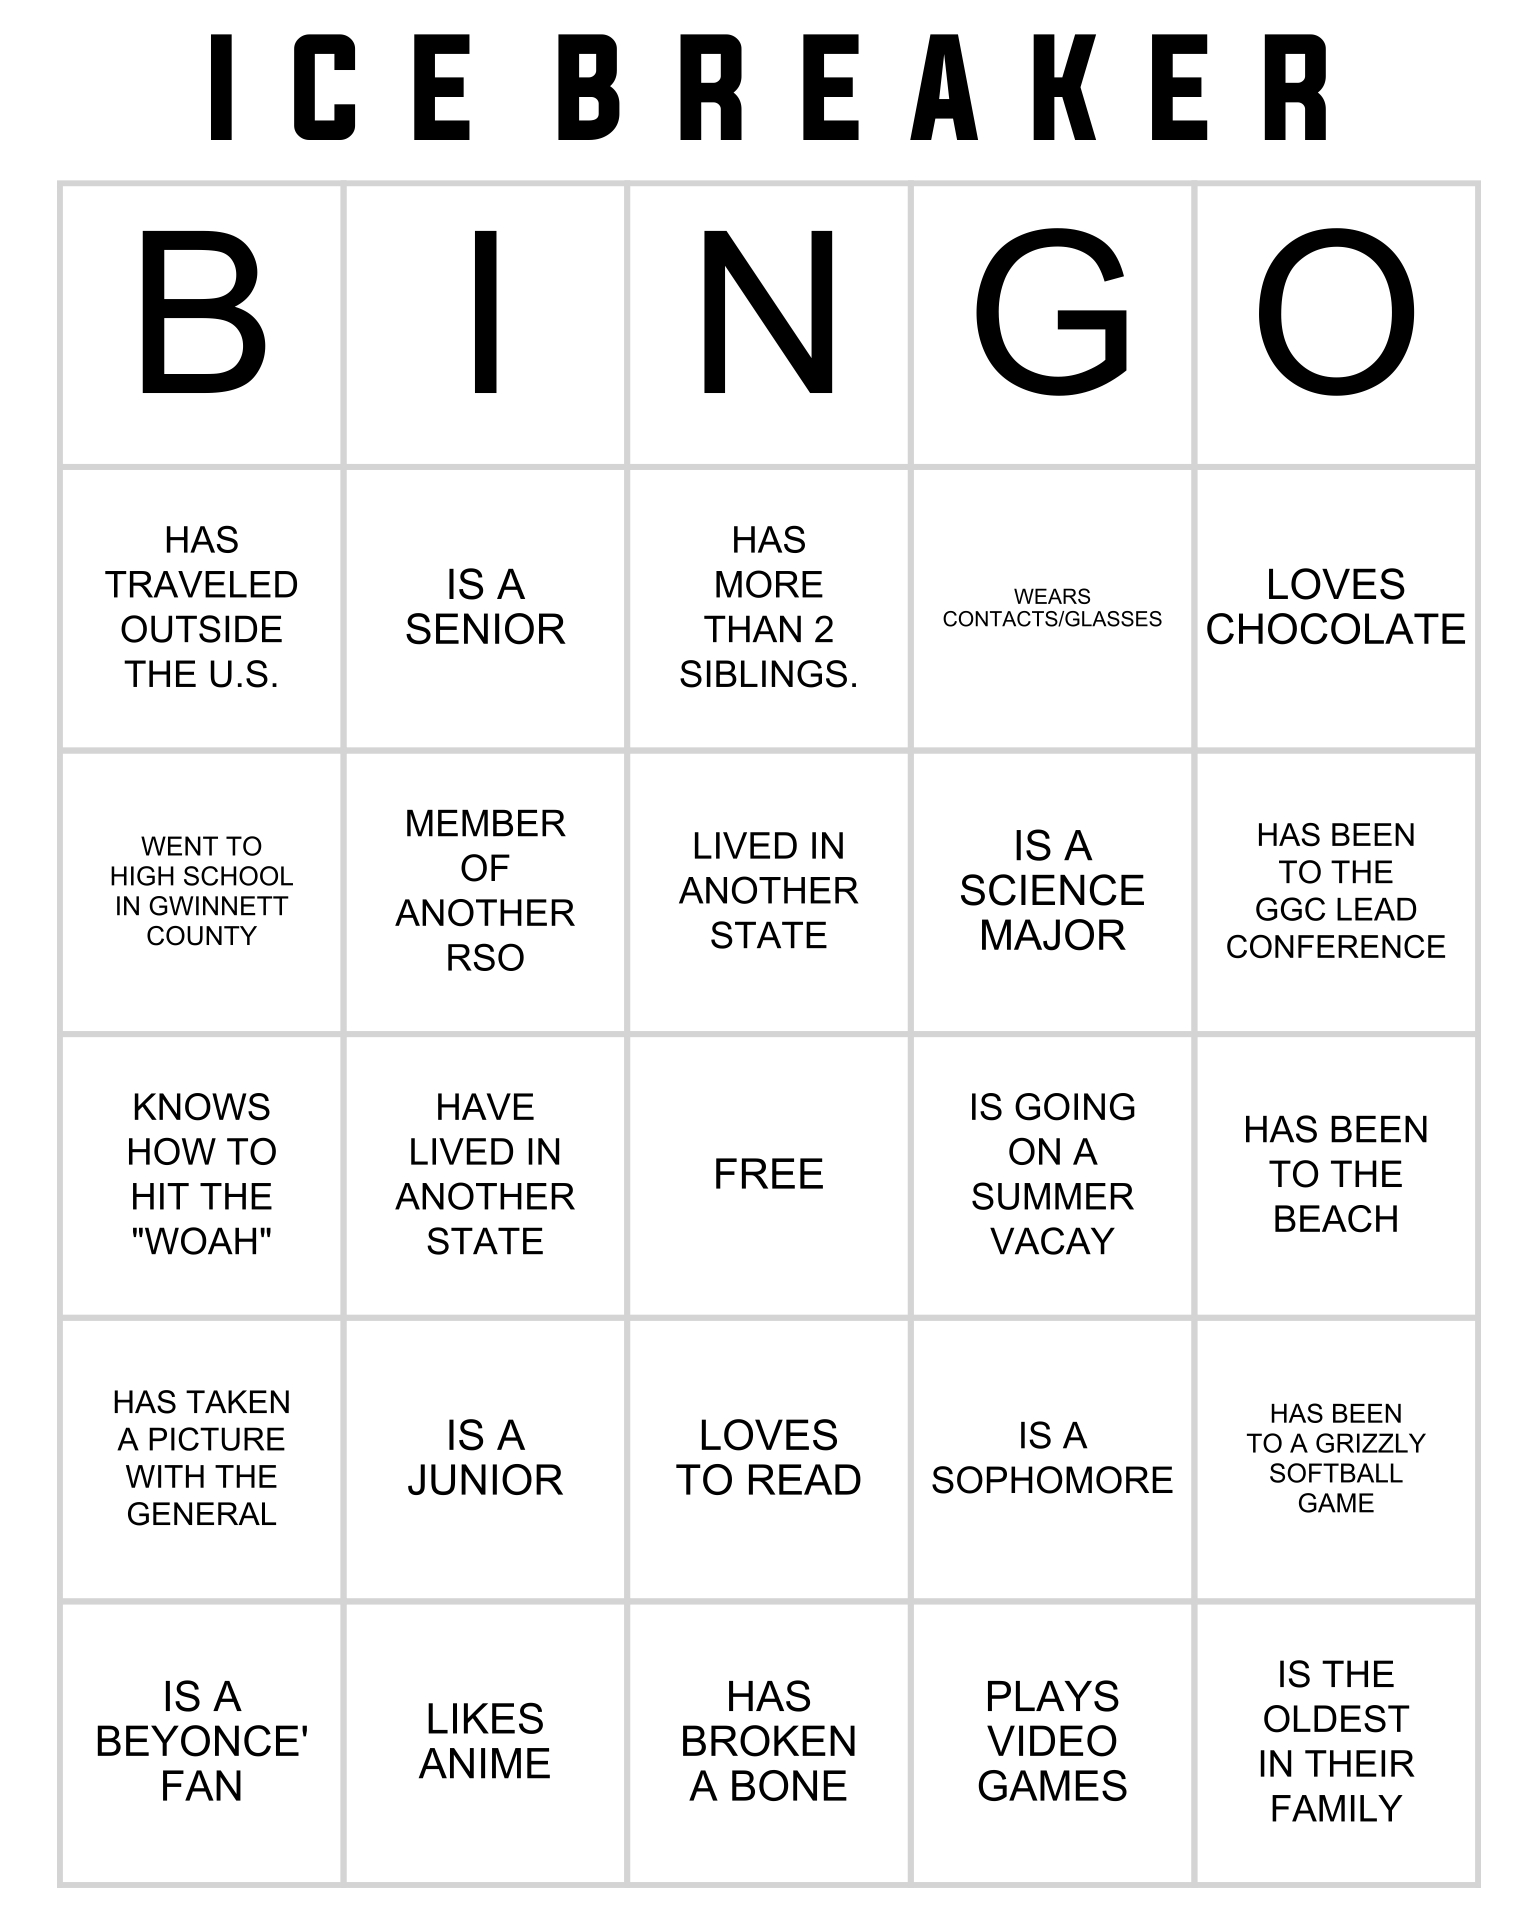 ice-breaker-bingo-cards-to-download-print-and-customize-sexiezpicz